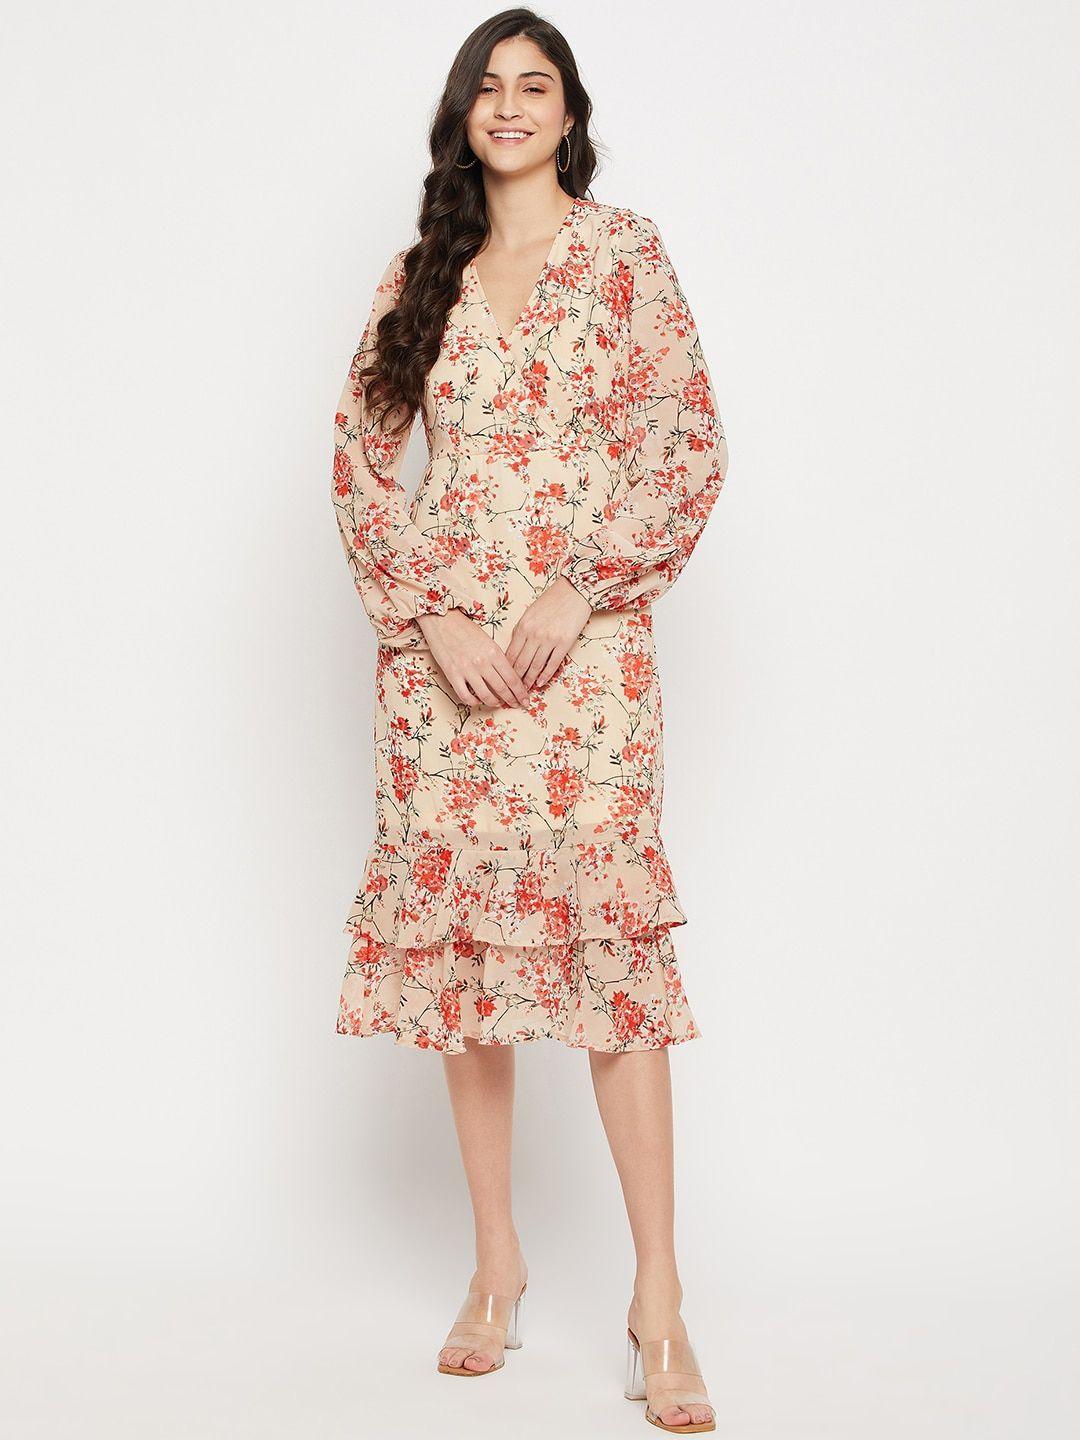 style blush floral printed puff sleeve ruffled fit and flare midi dress